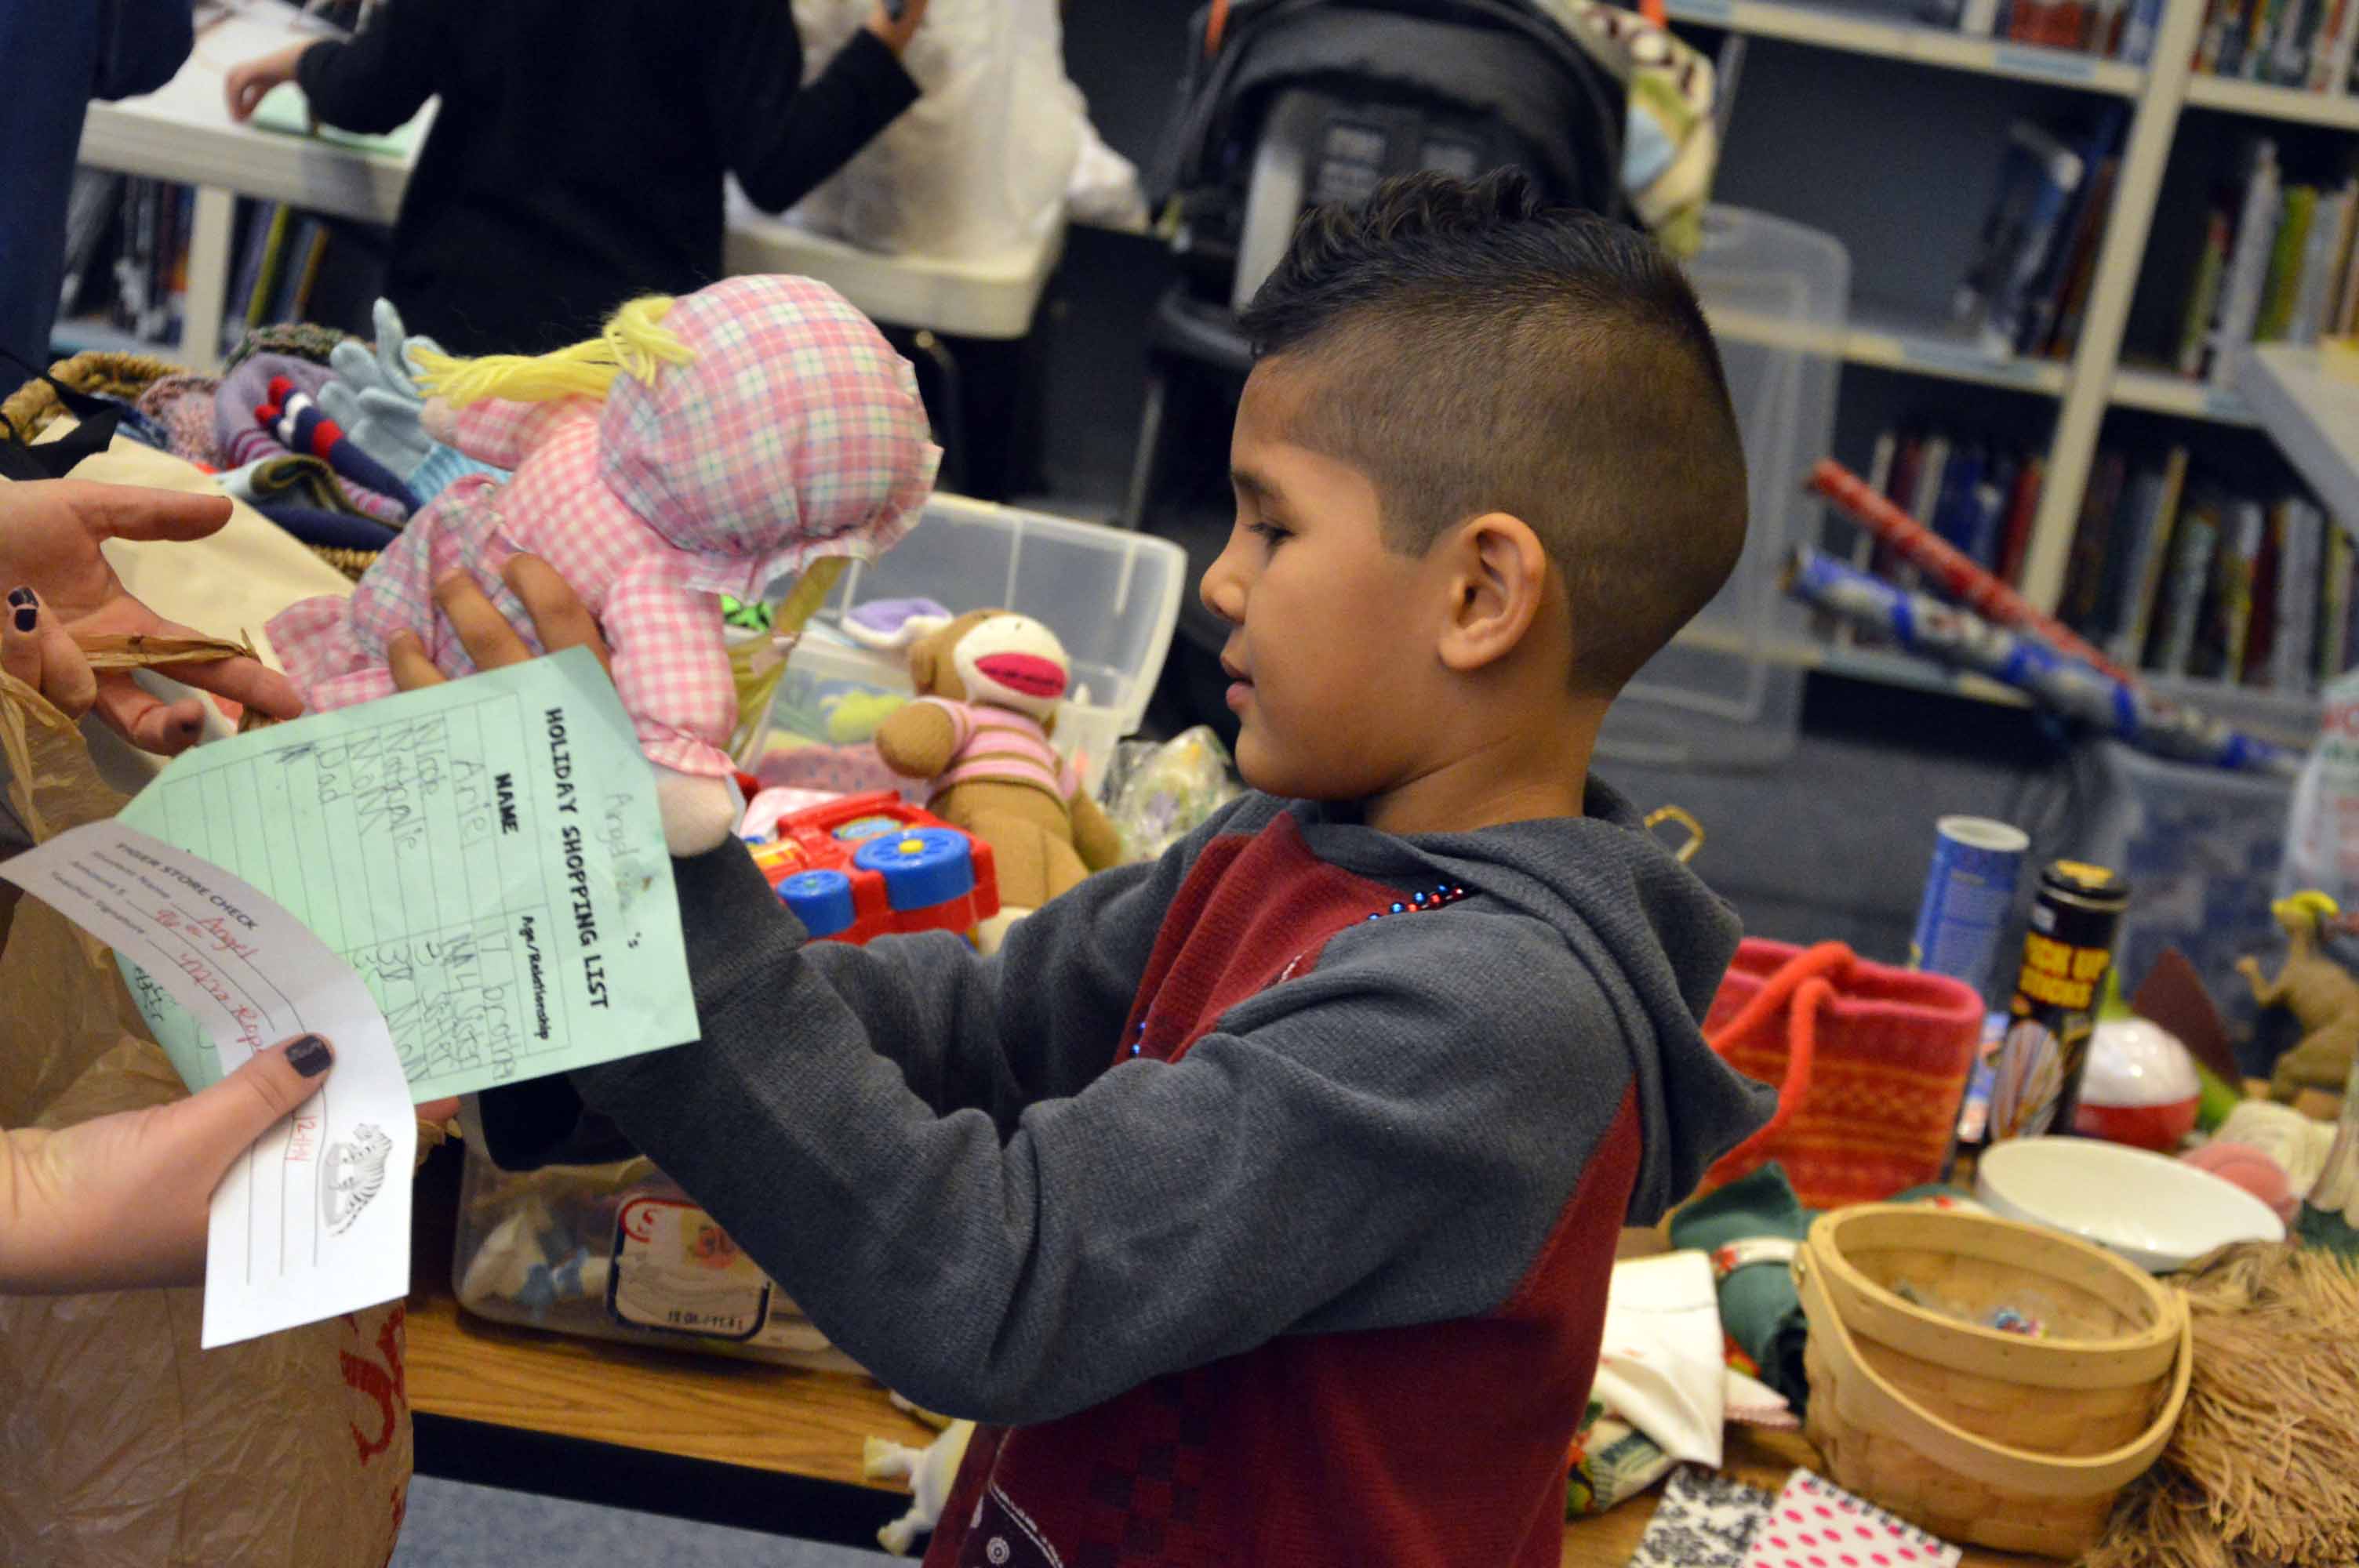 Students use their own high marks in school to buy gifts for family members